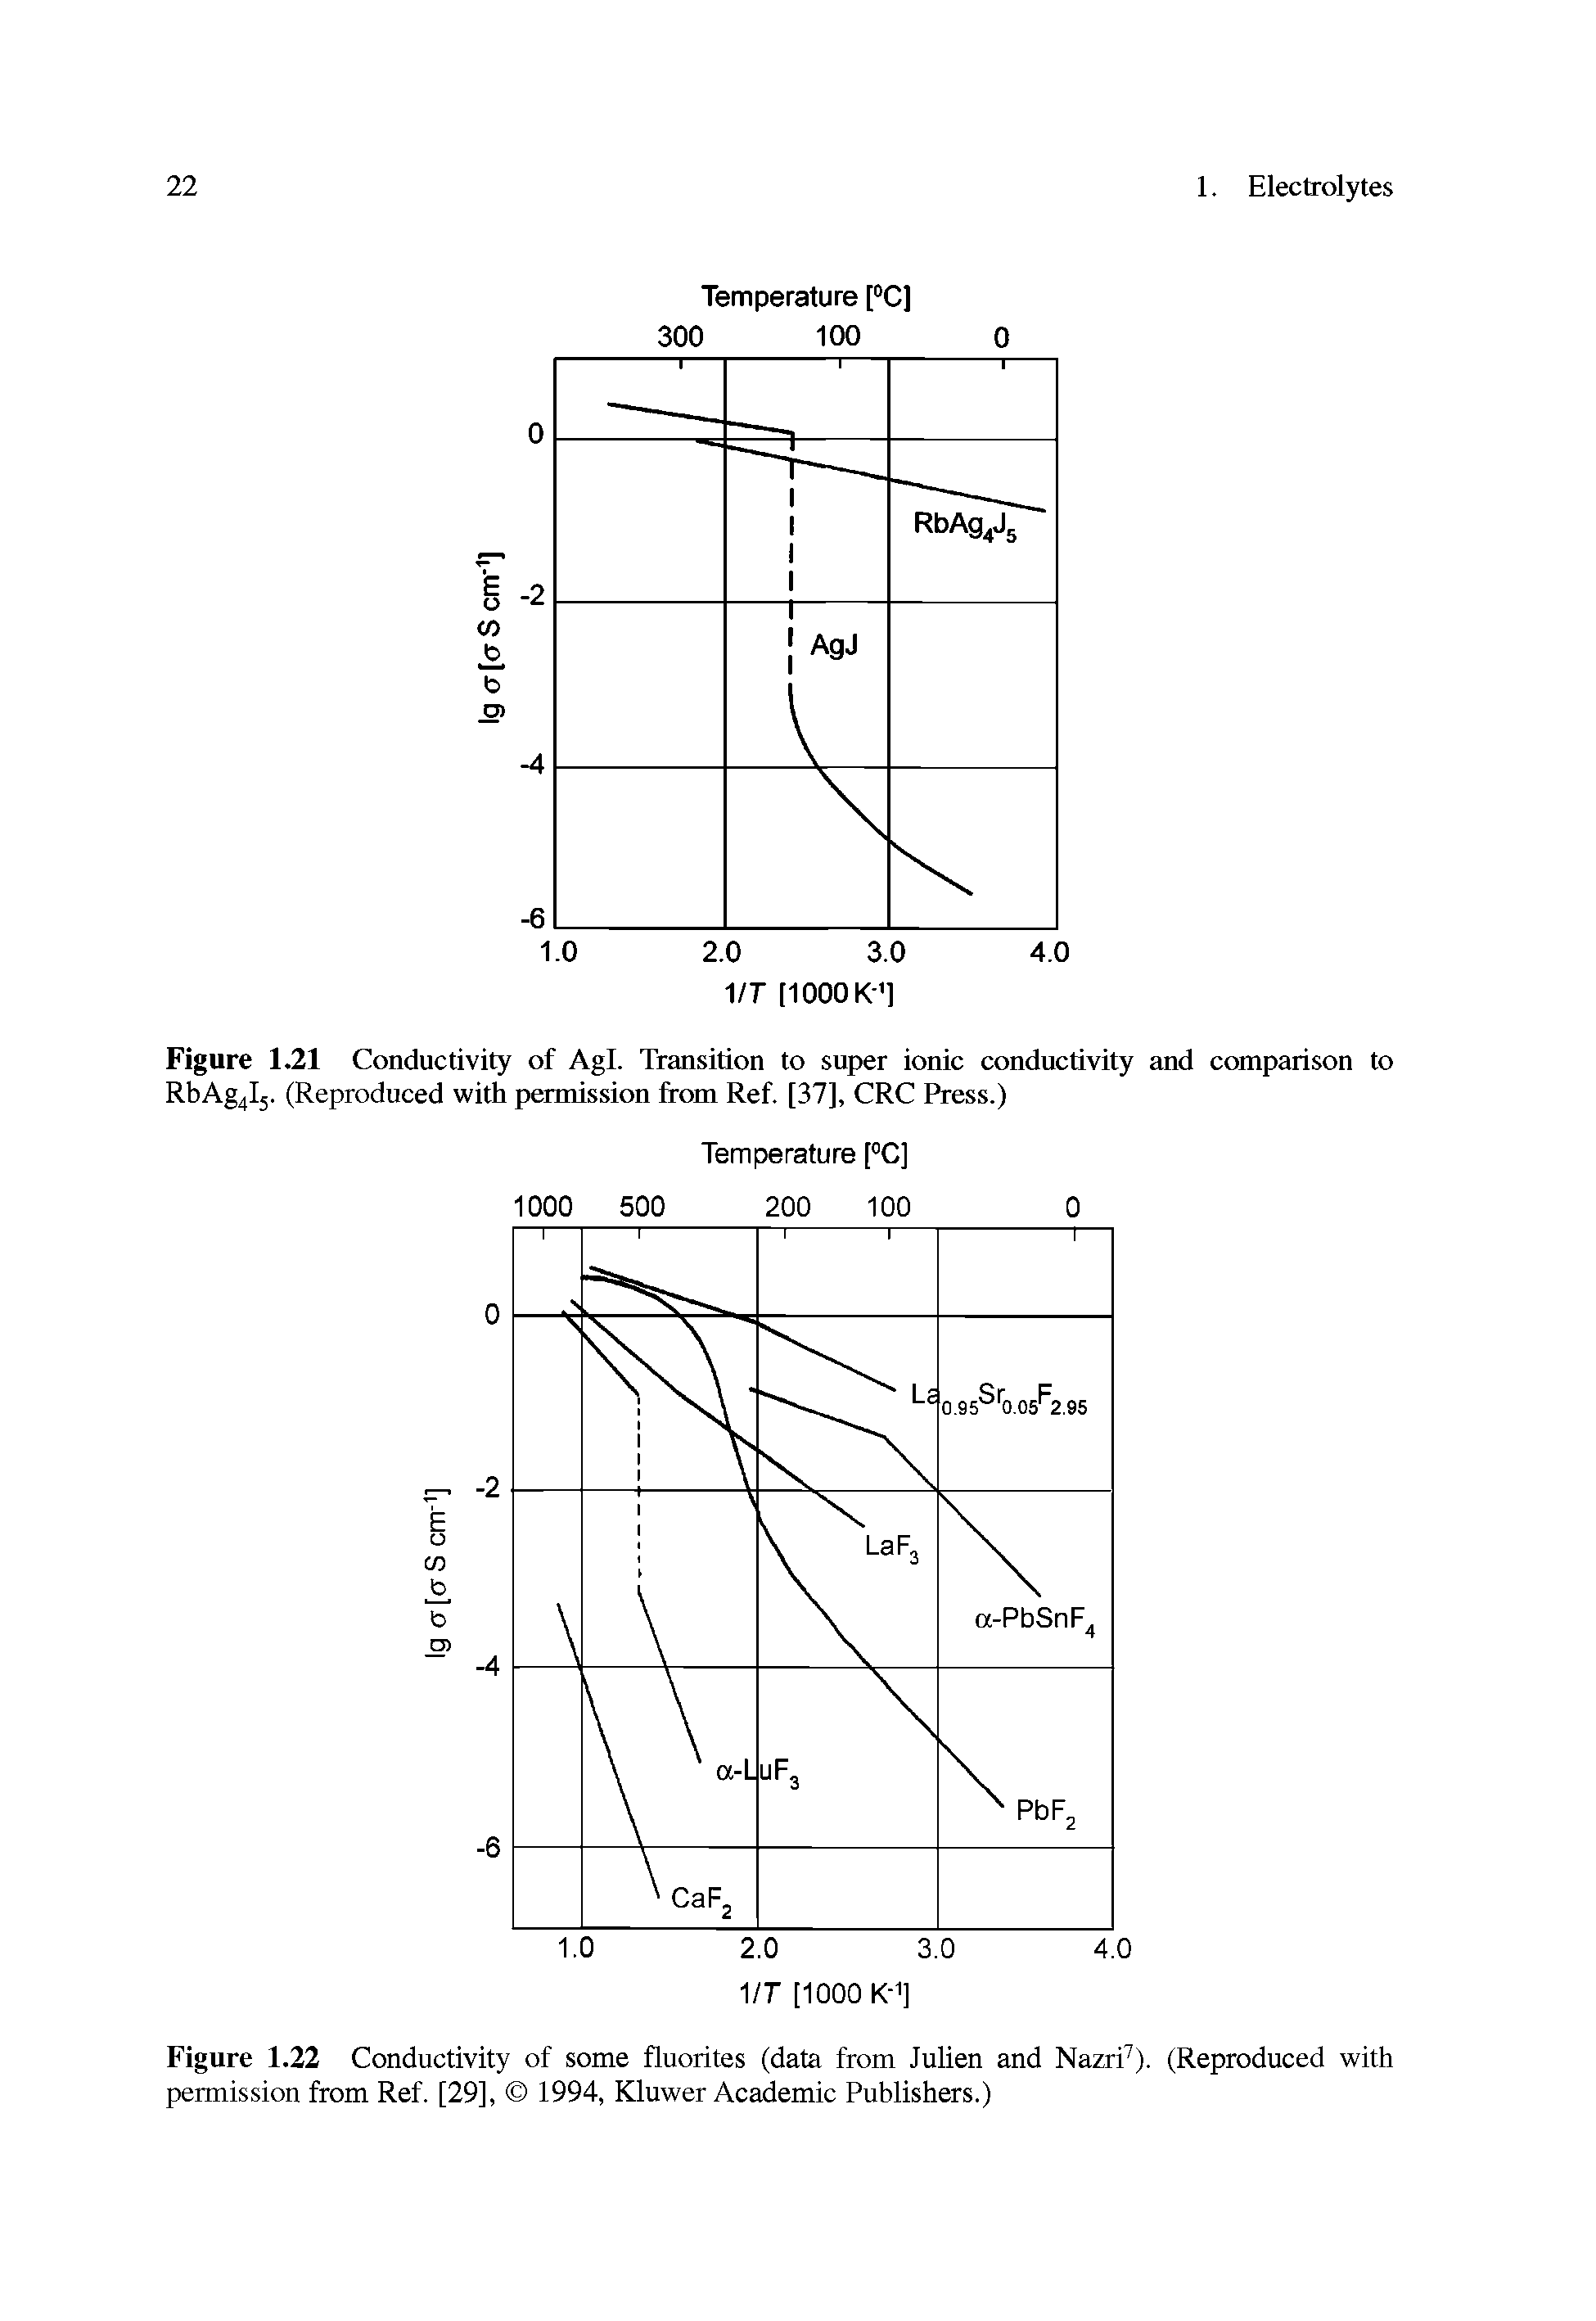 Figure 1.21 Conductivity of Agl. Transition to super ionic conductivity and comparison to RbAg4lj. (Reproduced with permission from Ref. [37], CRC Press.)...